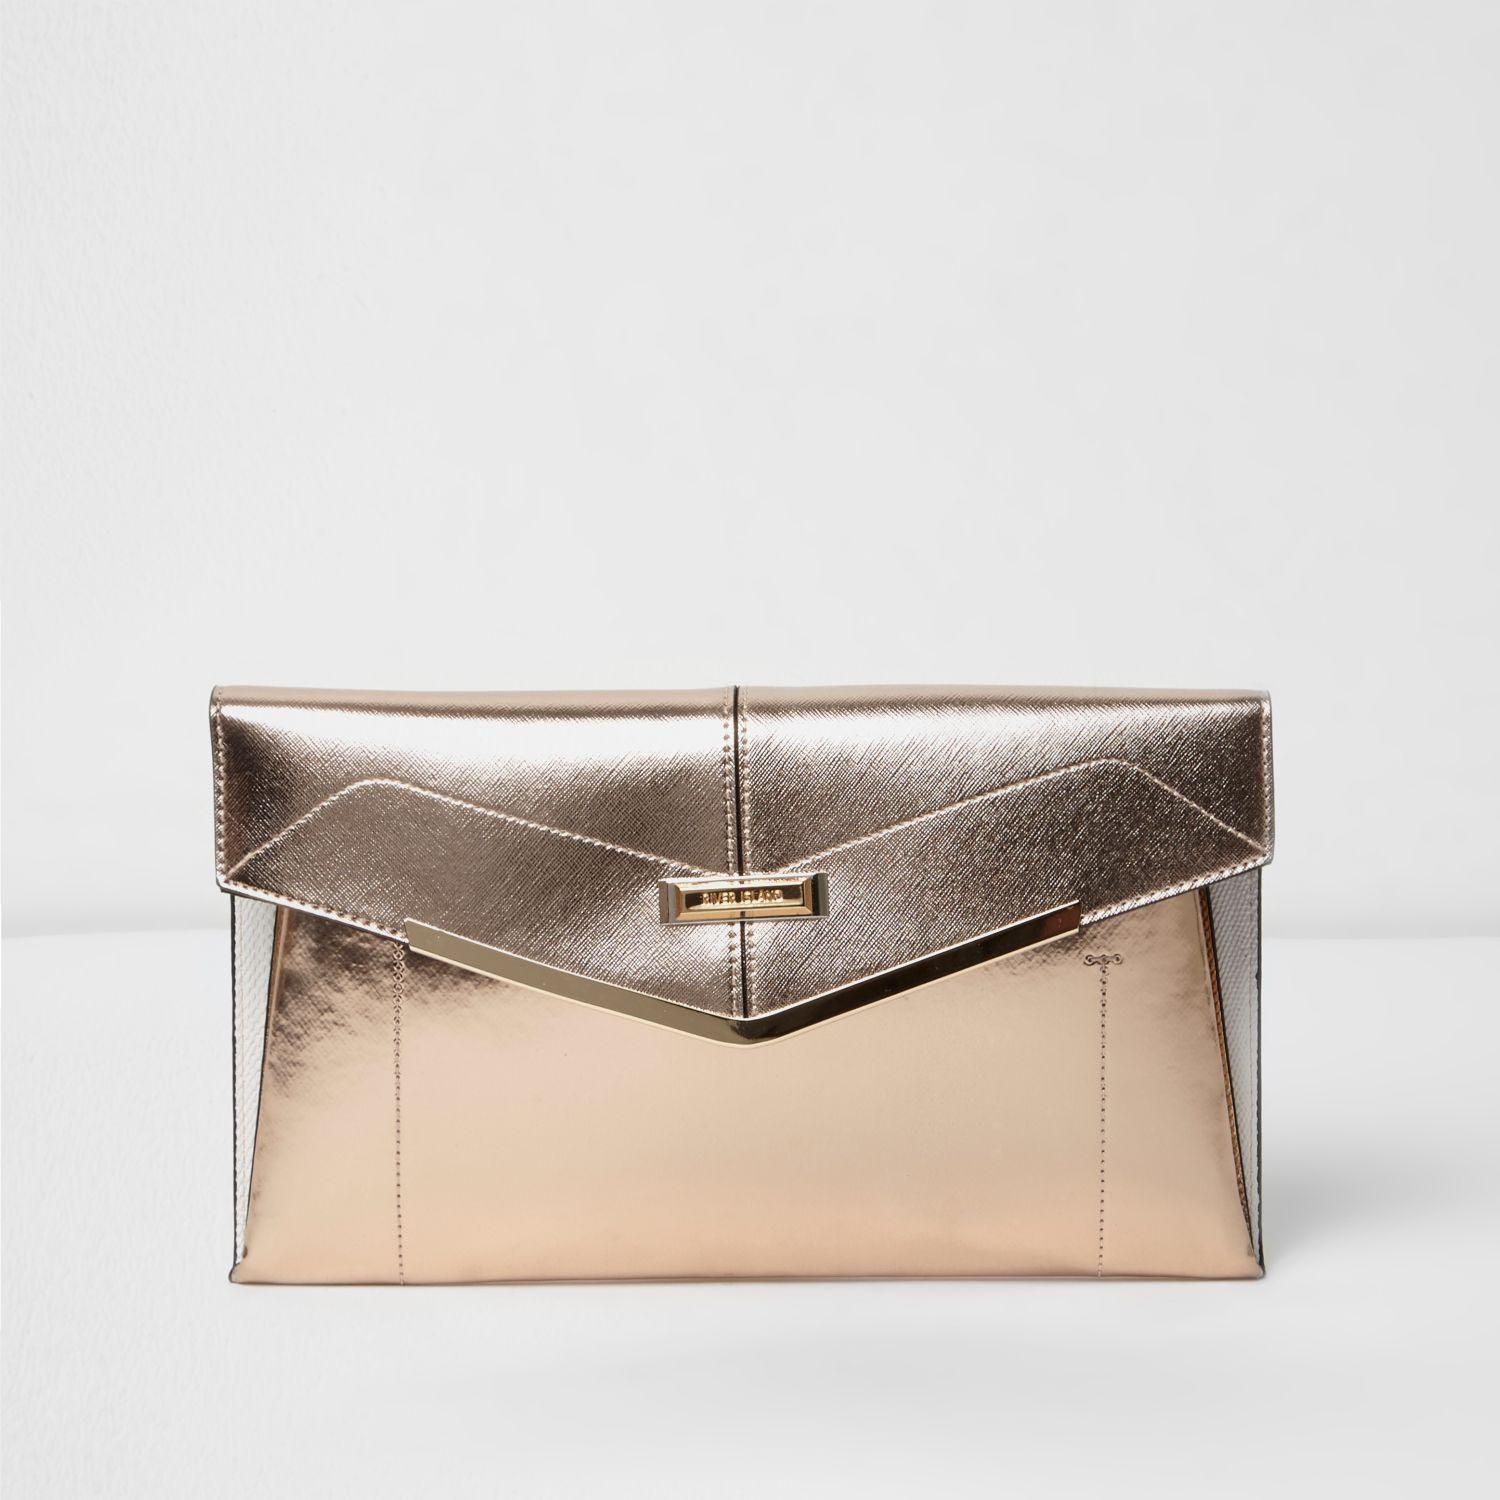 River Island Rose Gold Envelope Clutch Bag in Yellow - Lyst